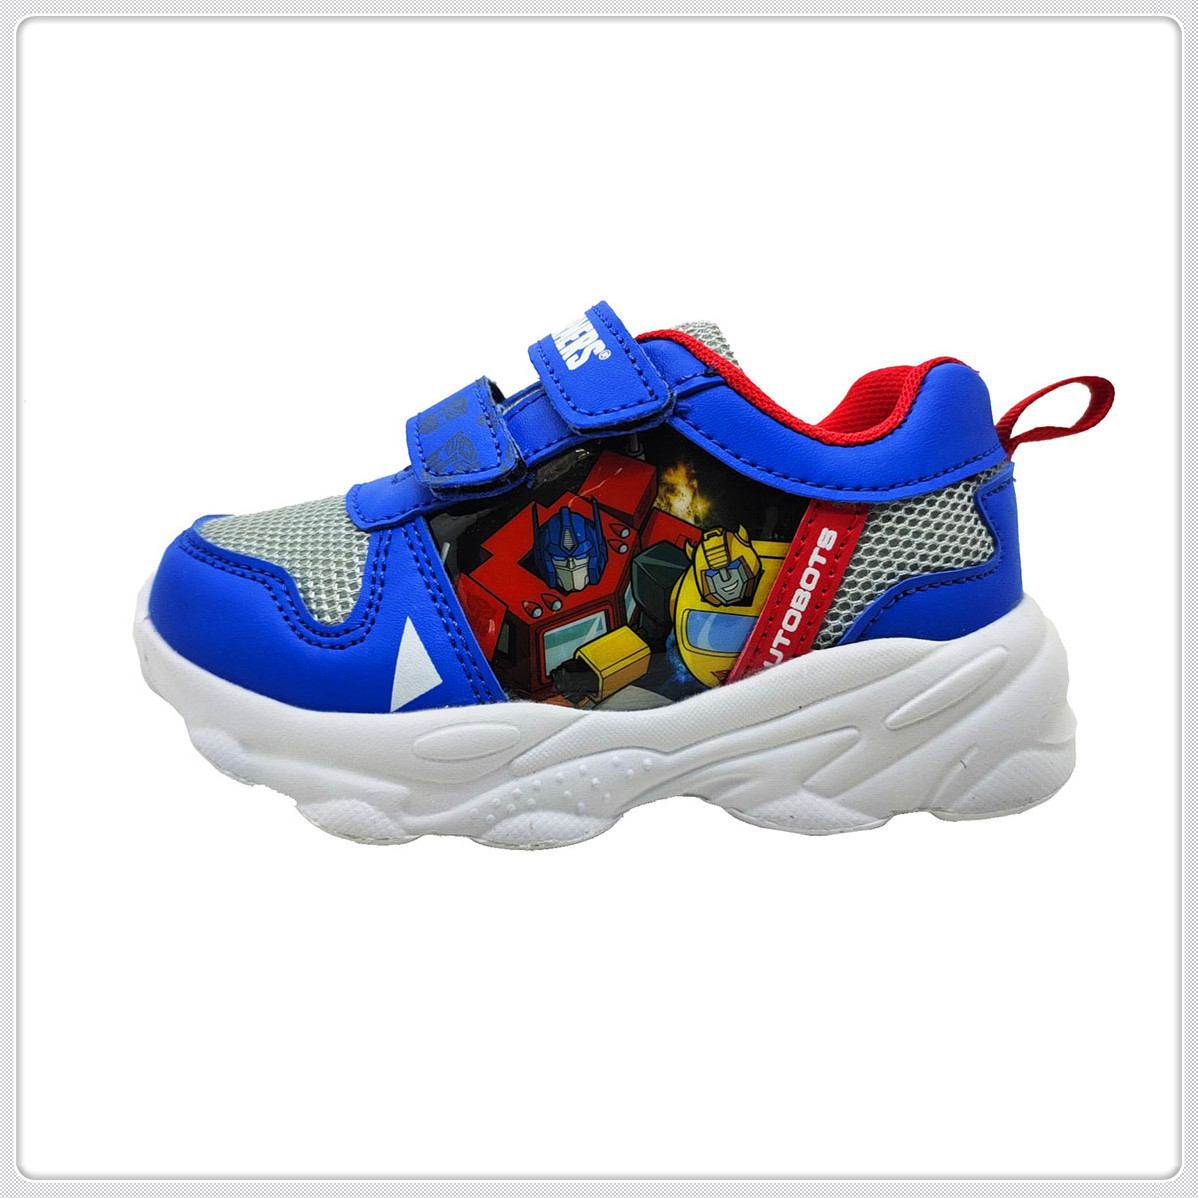  Kid Shoes Mesh+PU with PVC Patch on Upper, PU Velcro EVA Outsole